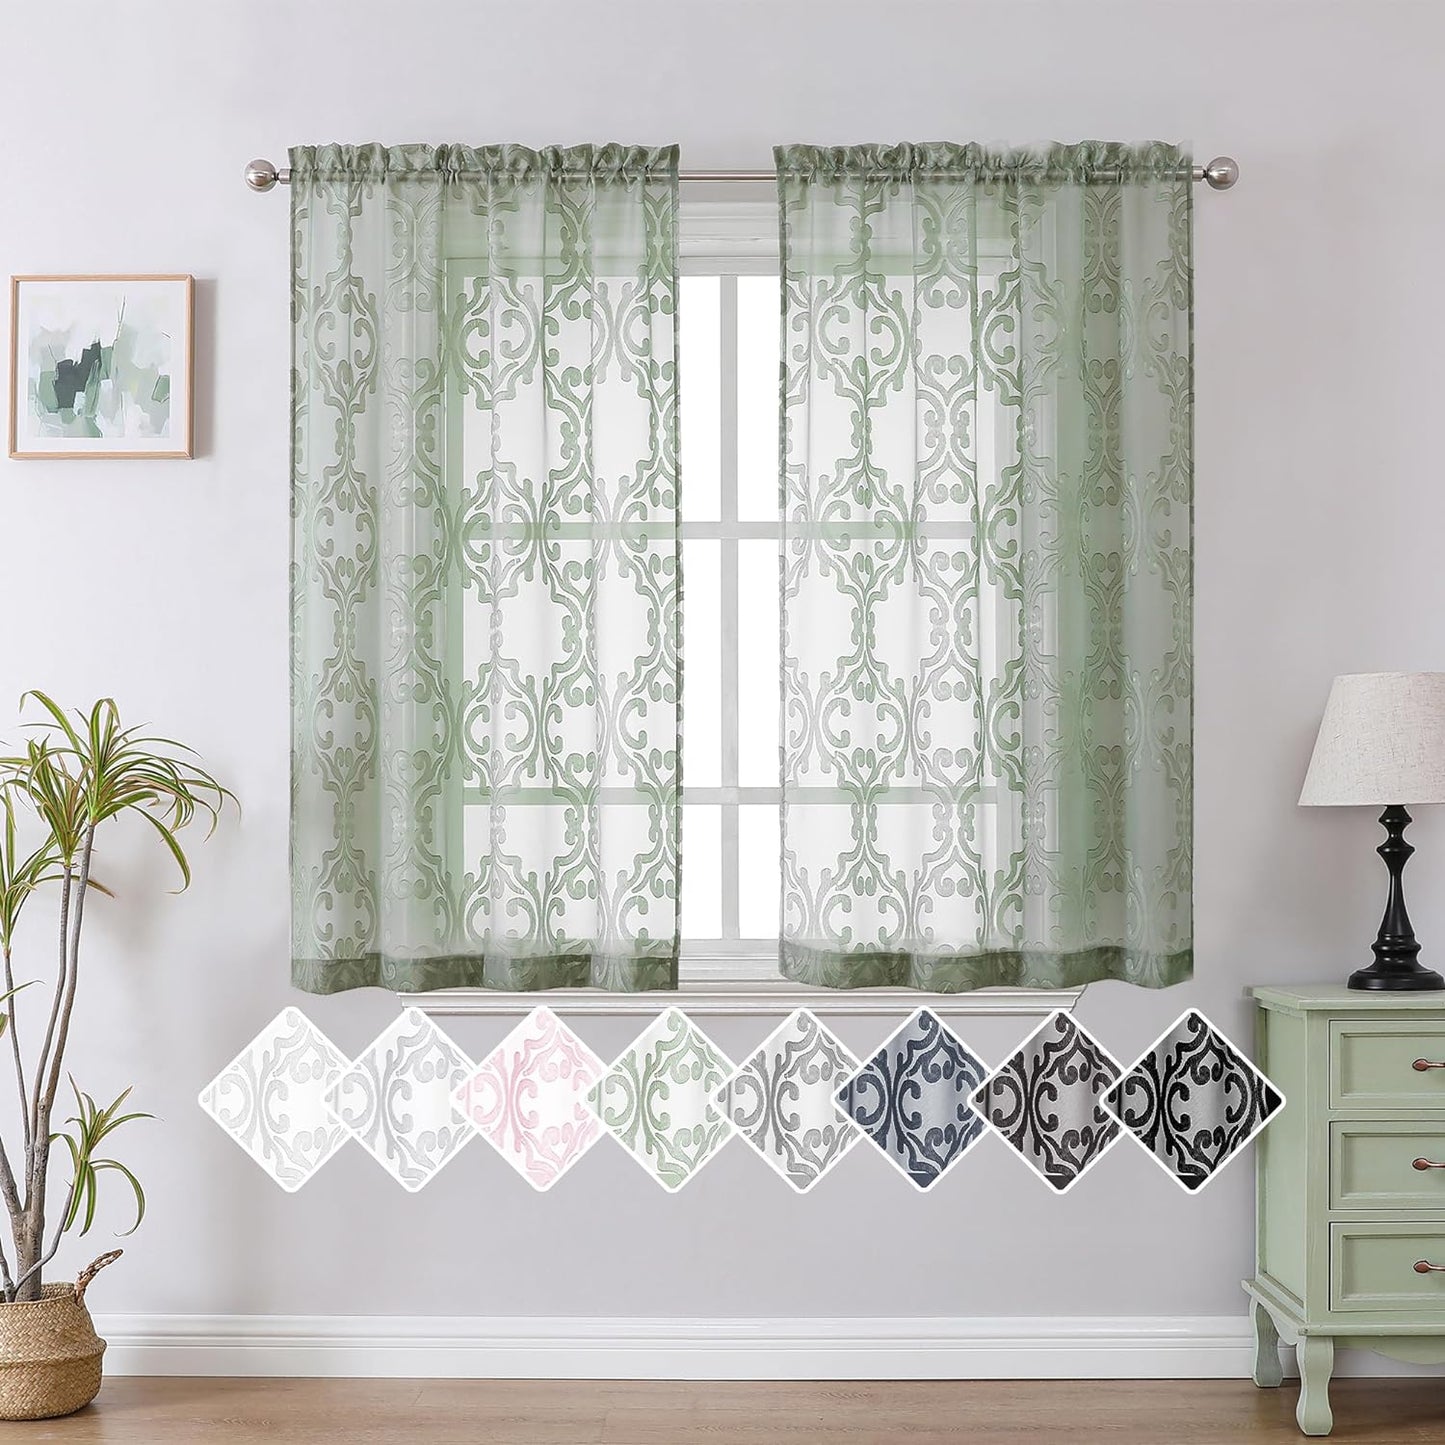 Aiyufeng Suri 2 Panels Sheer Sage Green Curtains 63 Inches Long, Light & Airy Privacy Textured Sheer Drapes, Dual Rod Pocket Voile Clipped Floral Luxury Panels for Bedroom Living Room, 42 X 63 Inch  Aiyufeng Sage Green 2X42X45" 